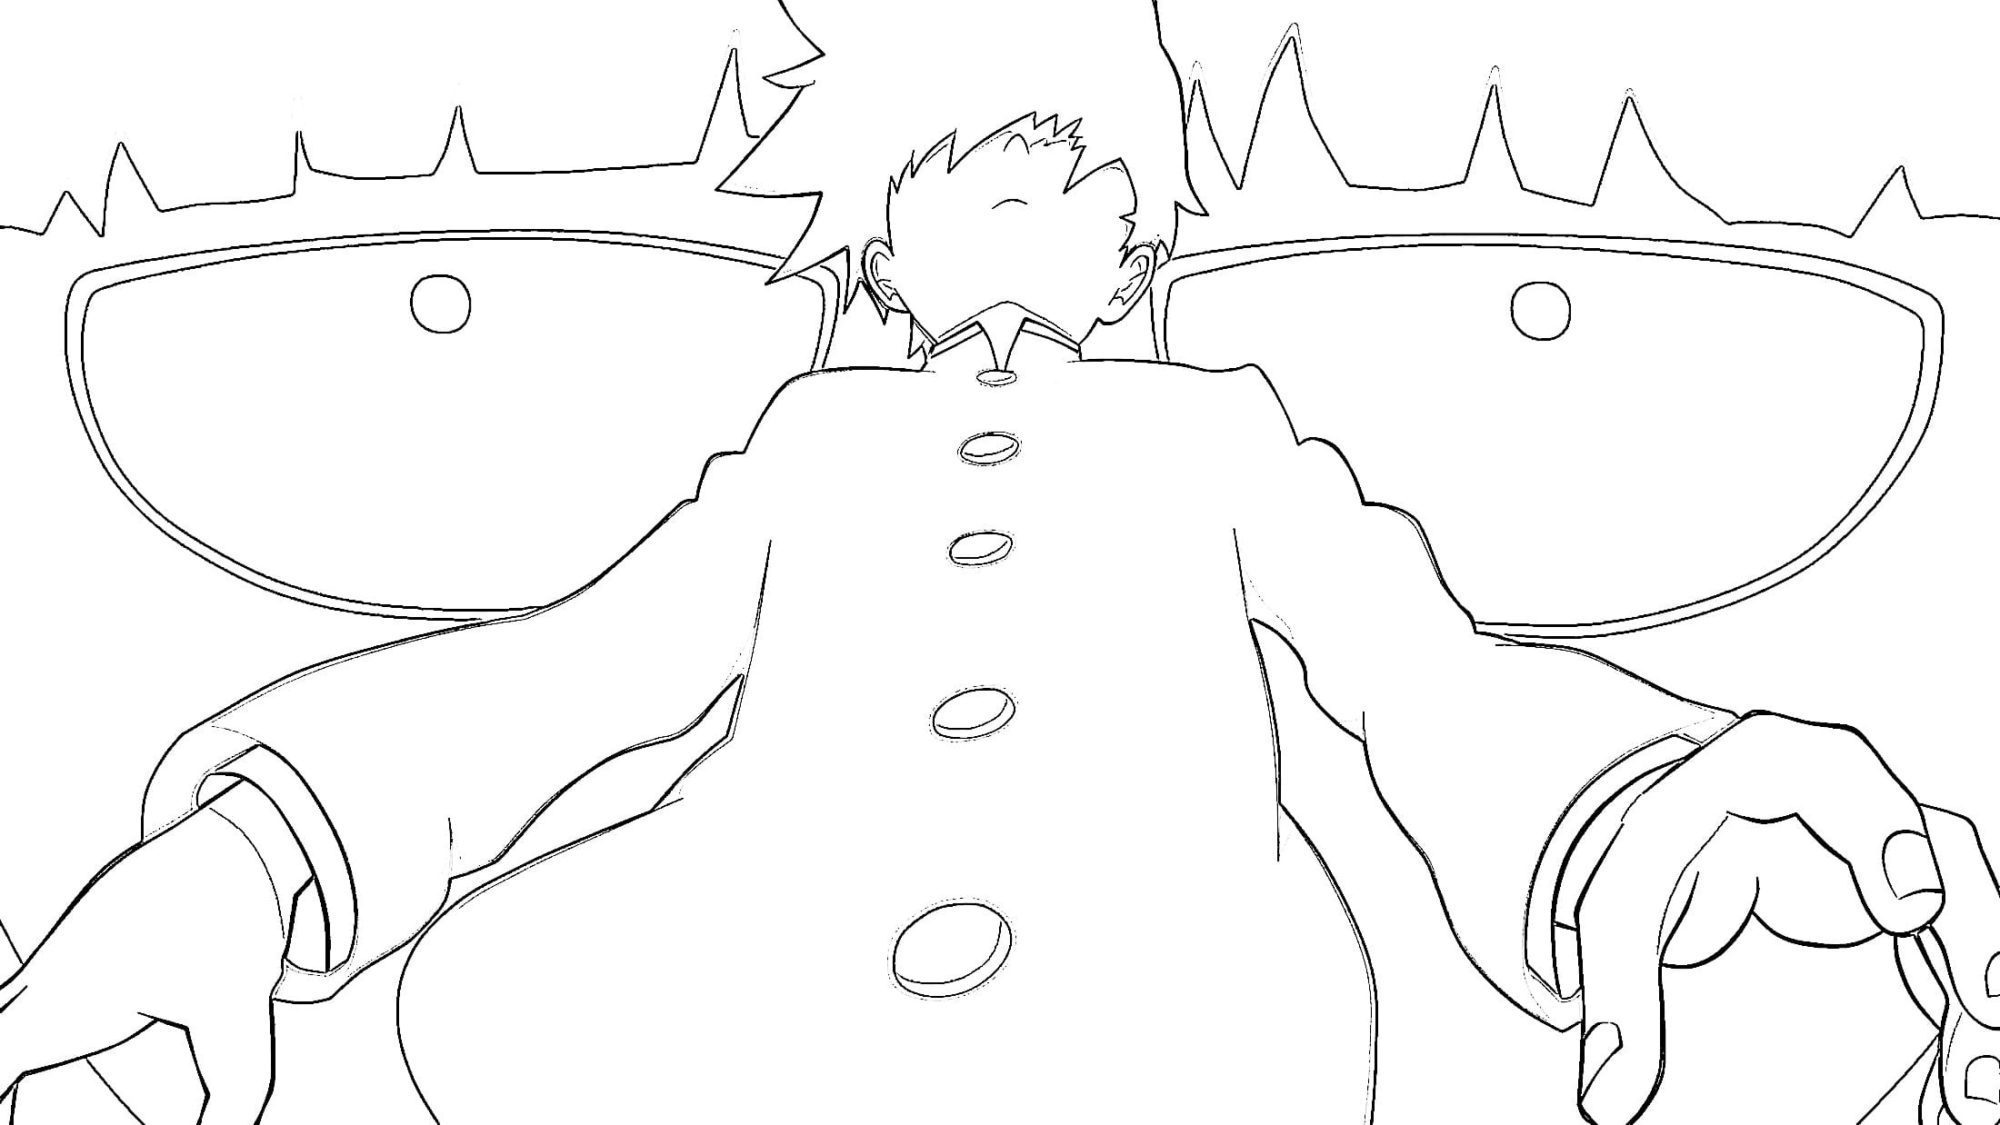 MOB PSYCHO 100 #7 COLORING PAGES